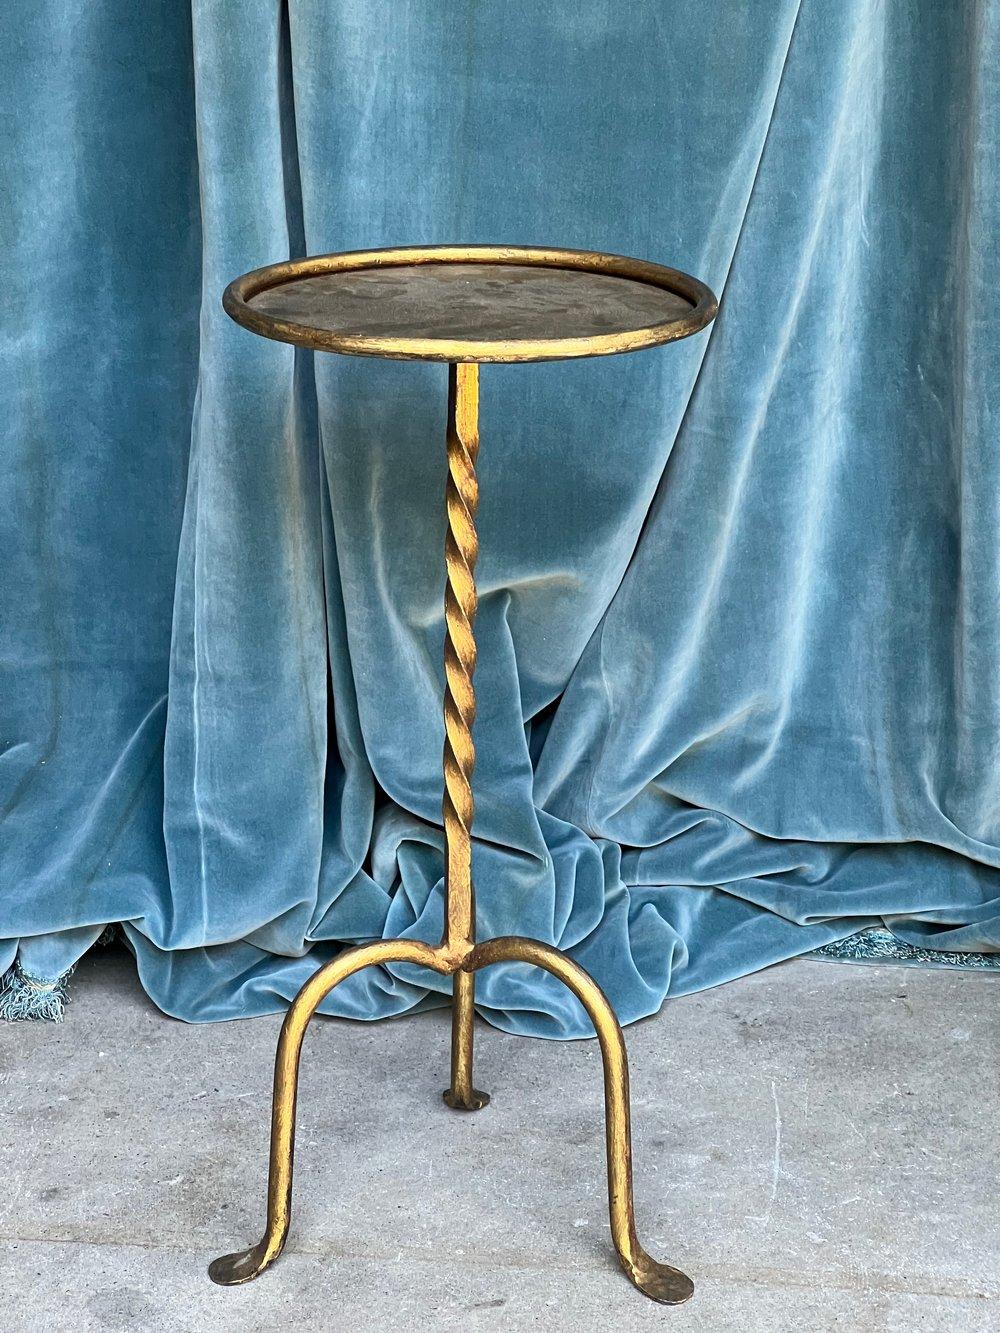 Spanish Gilt Iron Martini Table With a Twisted Stem